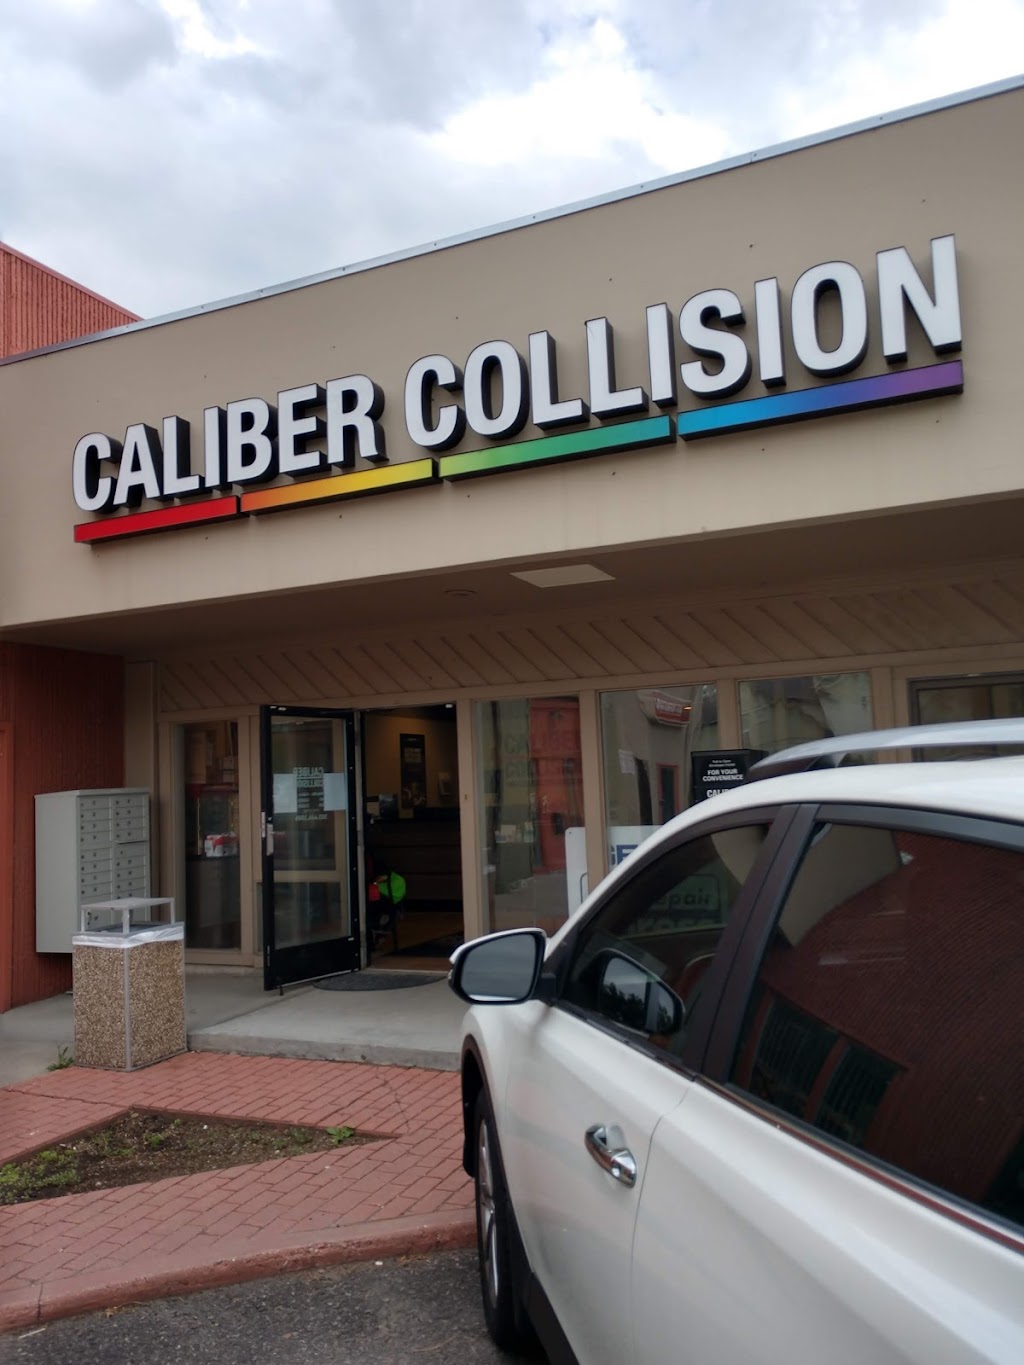 Caliber Collision | 3200 Valmont Rd, Boulder, CO 80301 | Phone: (303) 444-2886